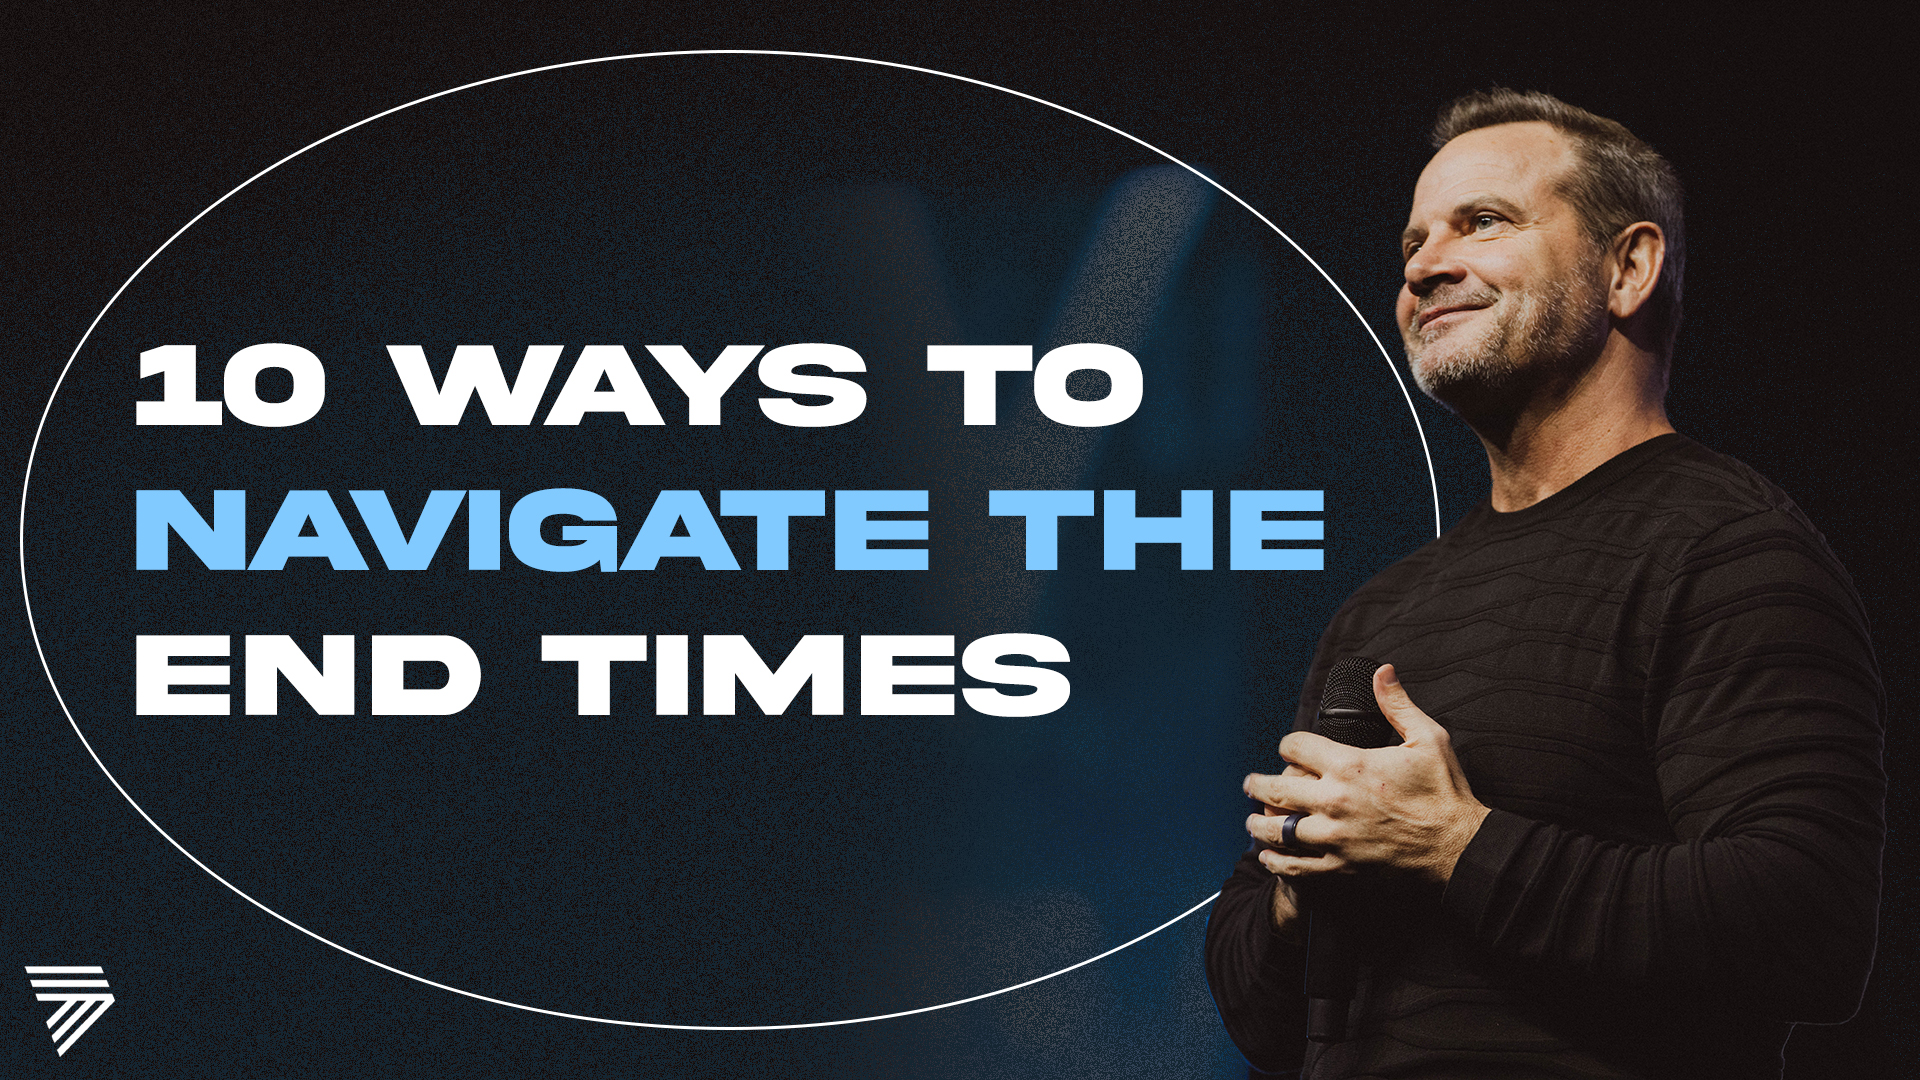 10 Ways to Navigate The End Times